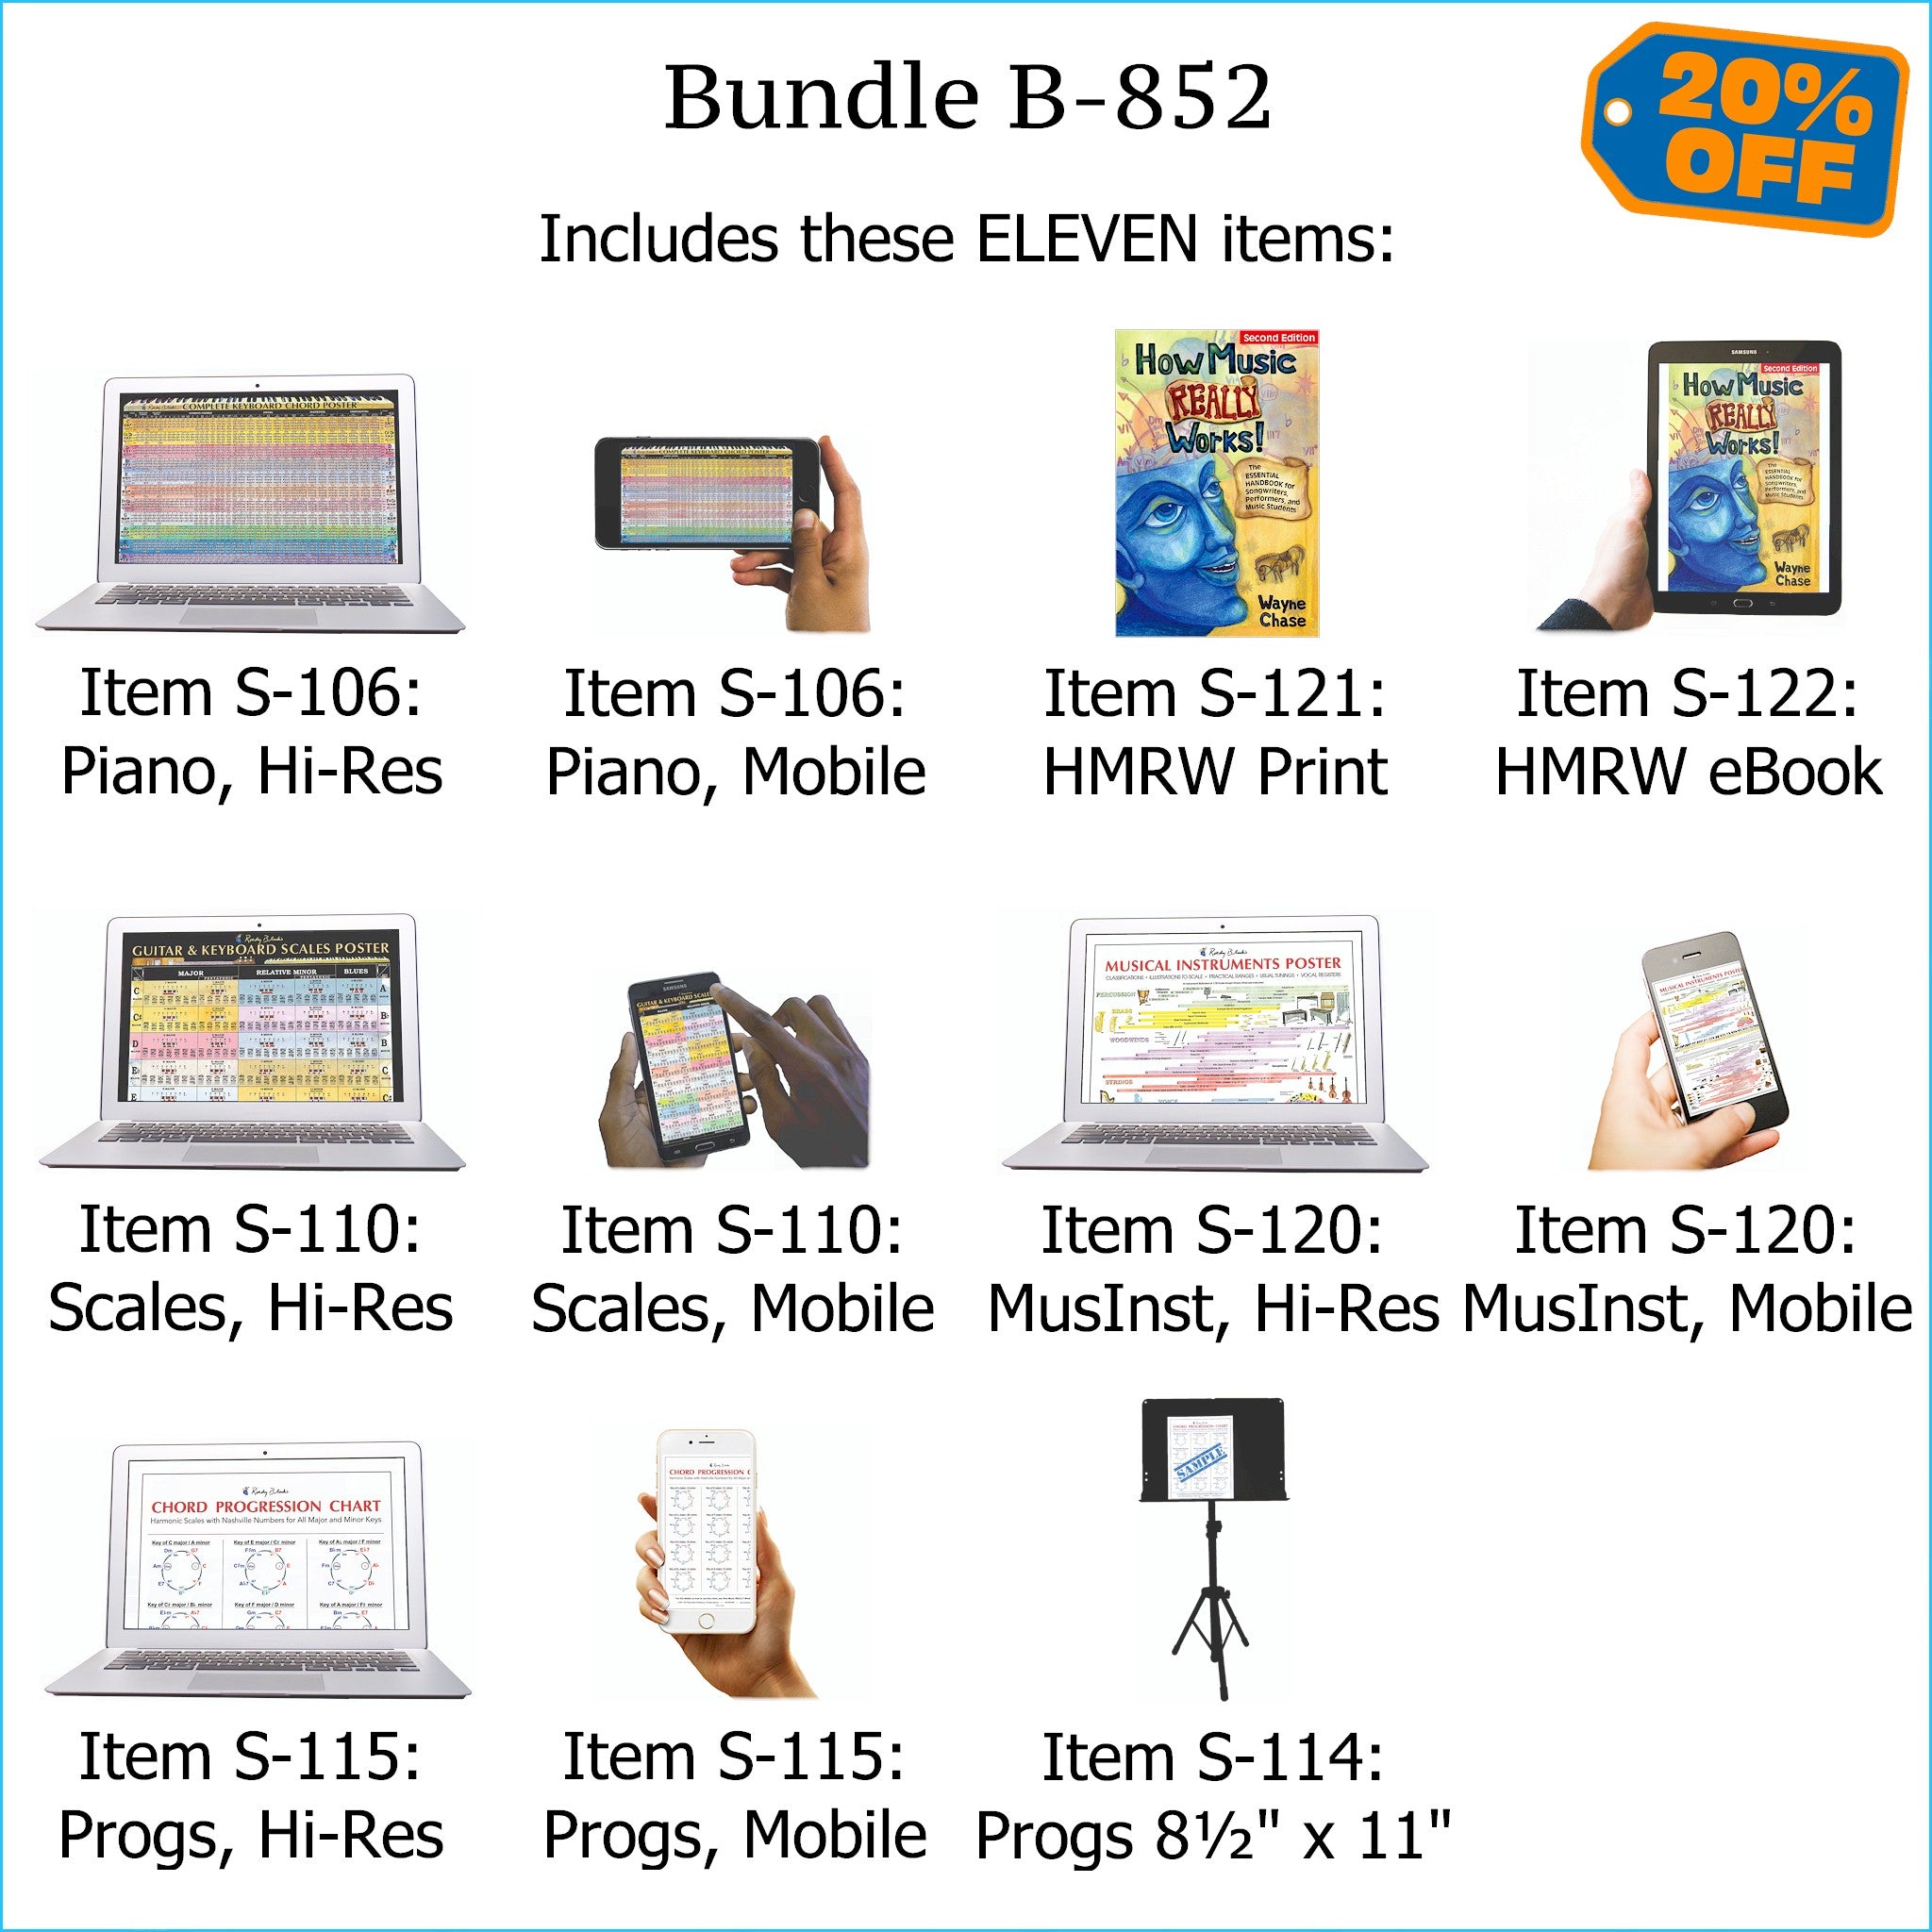 Bundle B-852: How Music REALLY Works! Print Book + E-Book, E-Posters and Printable E-Books - Keyboard Chords, Scales, Chord Progressions. FREE SHIPPING – USA & Canada.